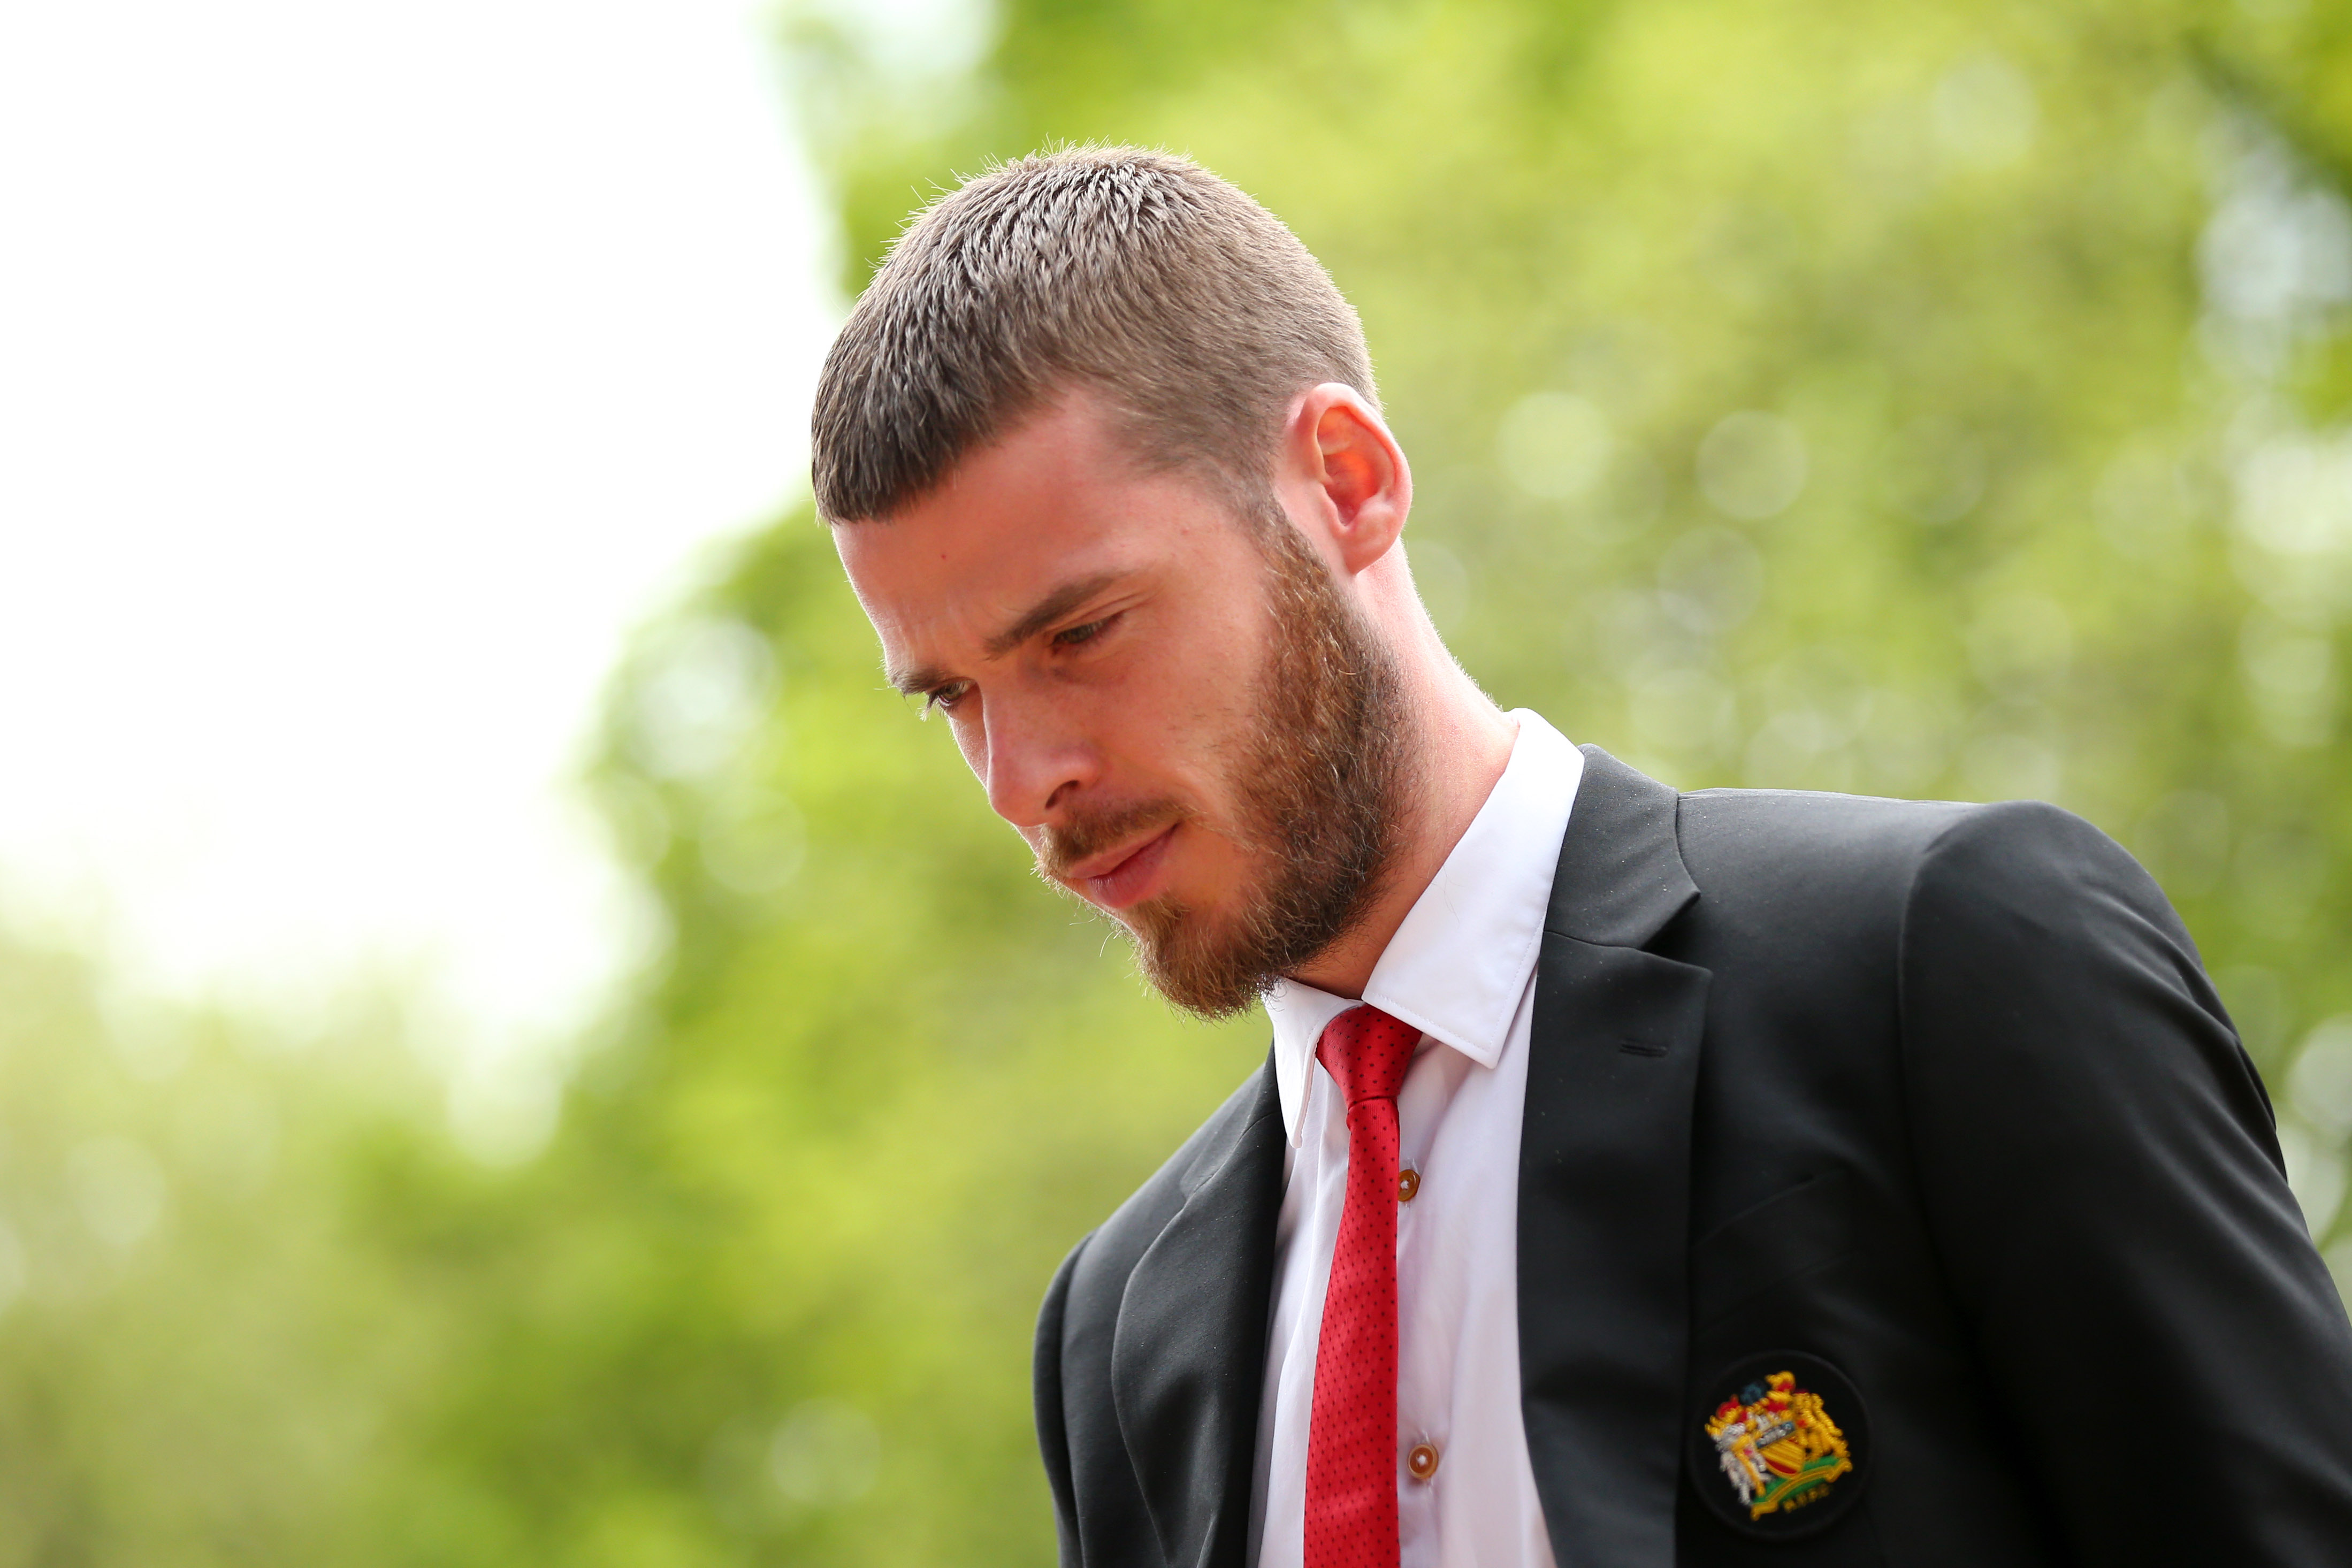 HUDDERSFIELD, ENGLAND - MAY 05:  David De Gea of Manchester United arrives  prior to the Premier League match between Huddersfield Town and Manchester United at John Smith's Stadium on May 05, 2019 in Huddersfield, United Kingdom. (Photo by Alex Livesey/Getty Images)